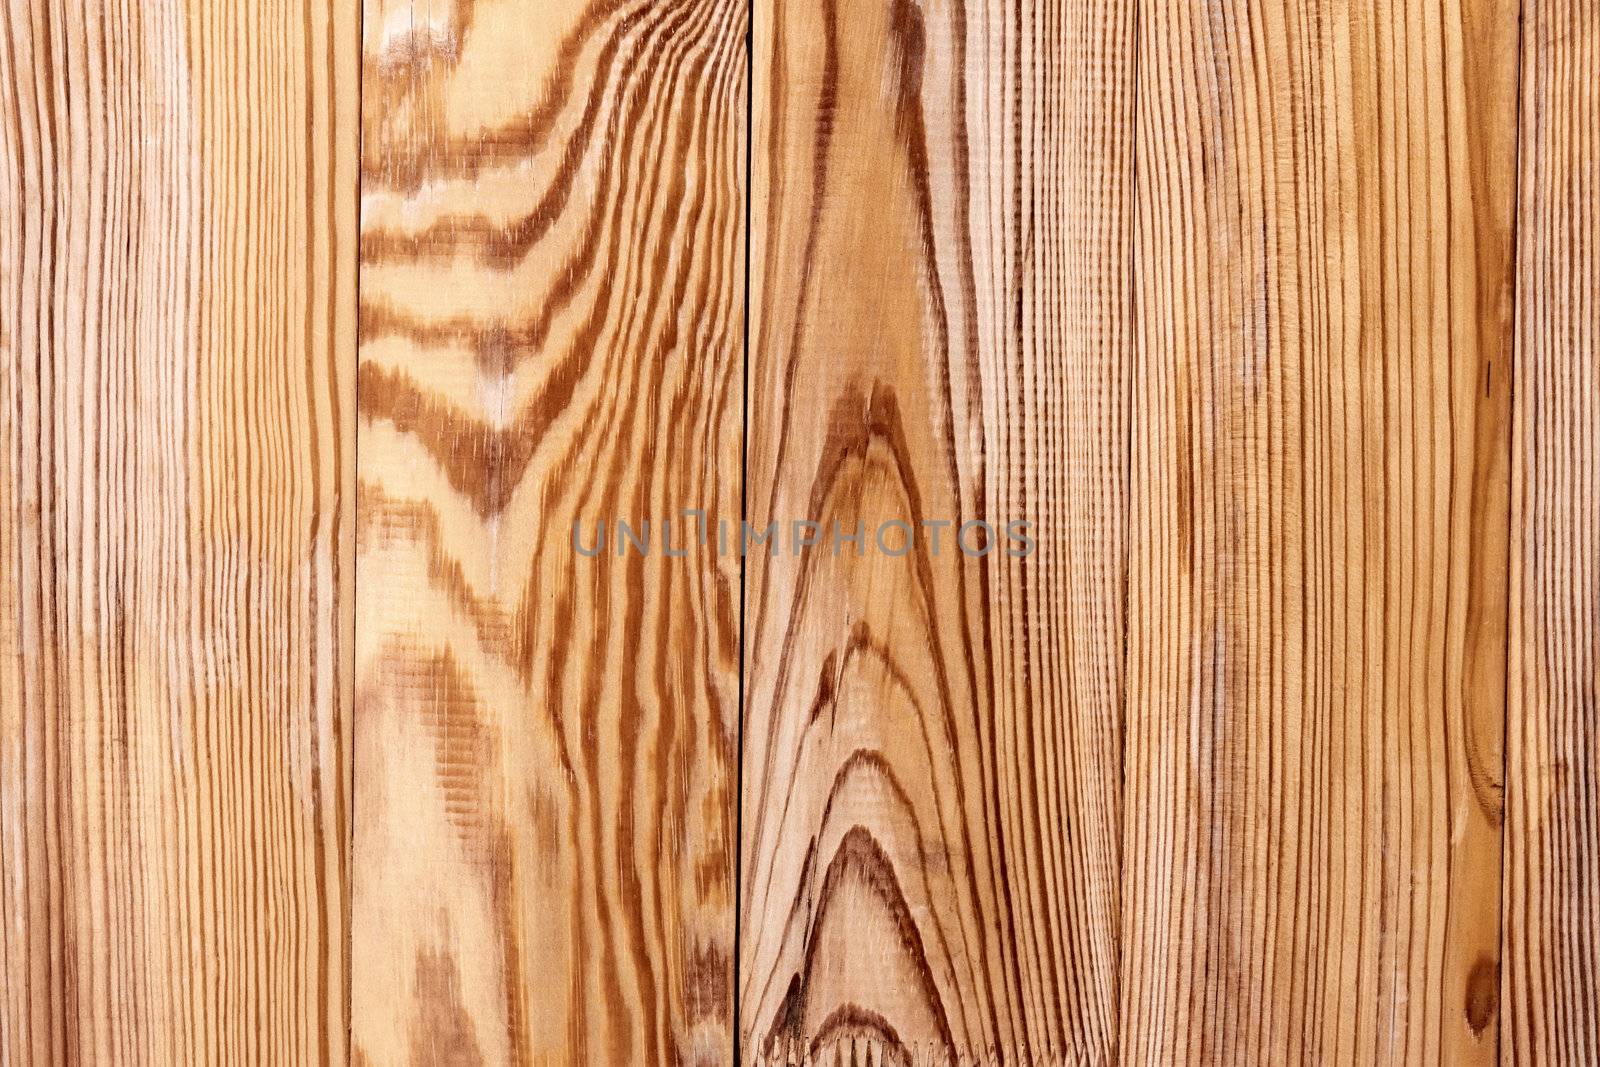 Wooden shield with vertical parallel boards have contrasting annual rings texture